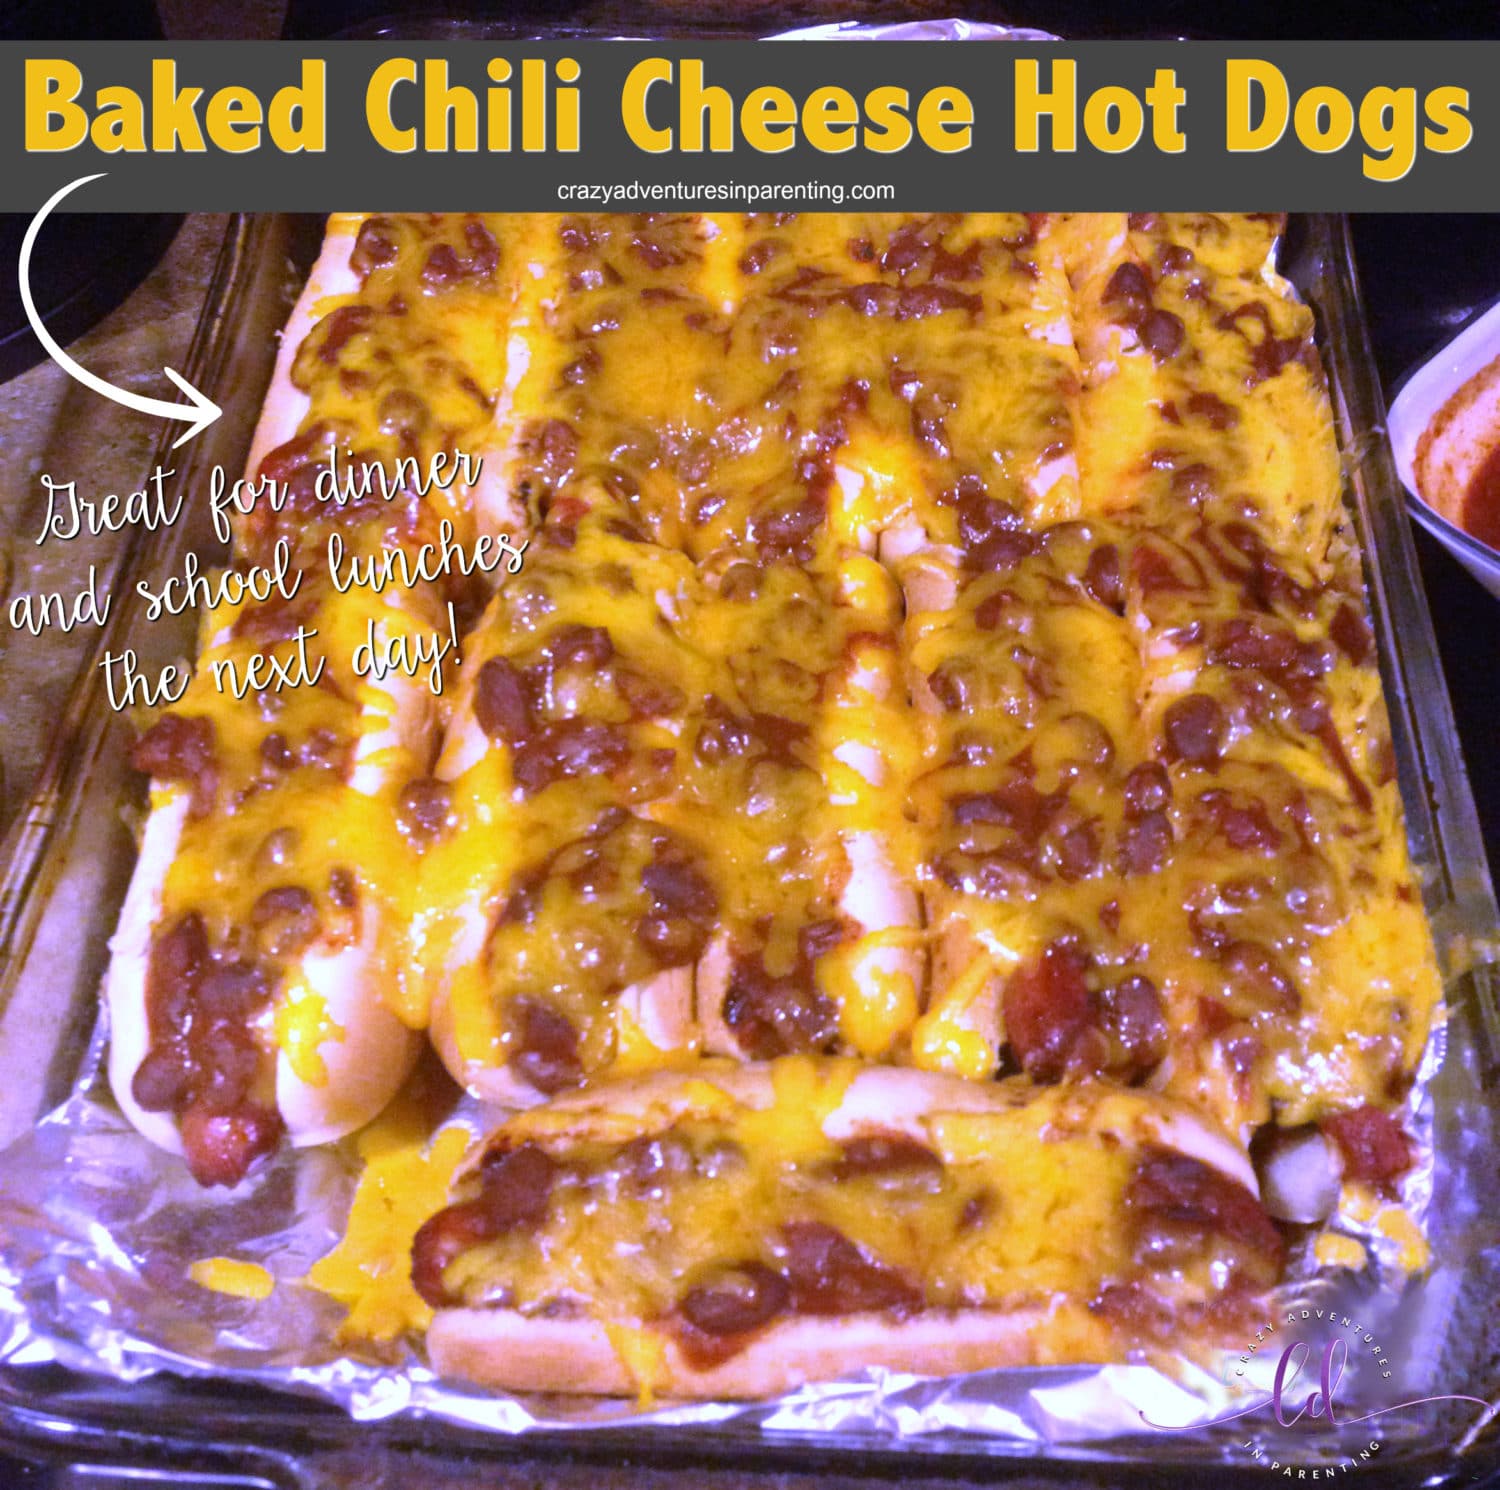 Baked Chili Cheese Hot Dogs Recipe